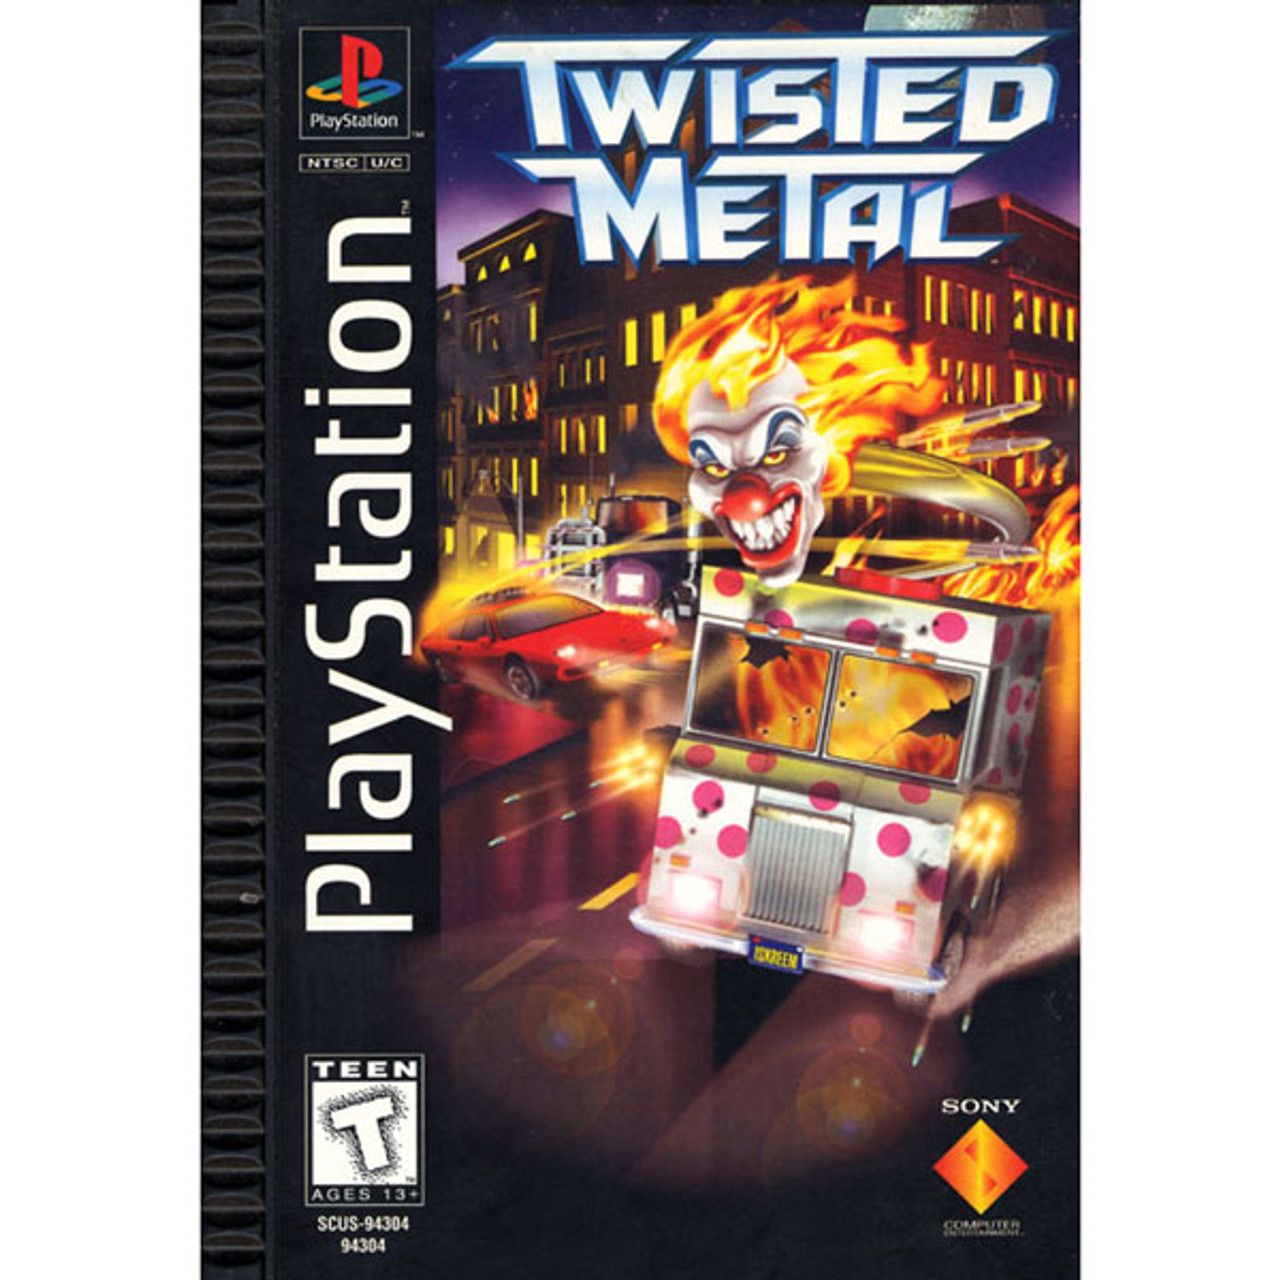 PLAYSTATION PS1 VIDEO GAME TWISTED METAL 4 CASE & MANUAL COMPLETE